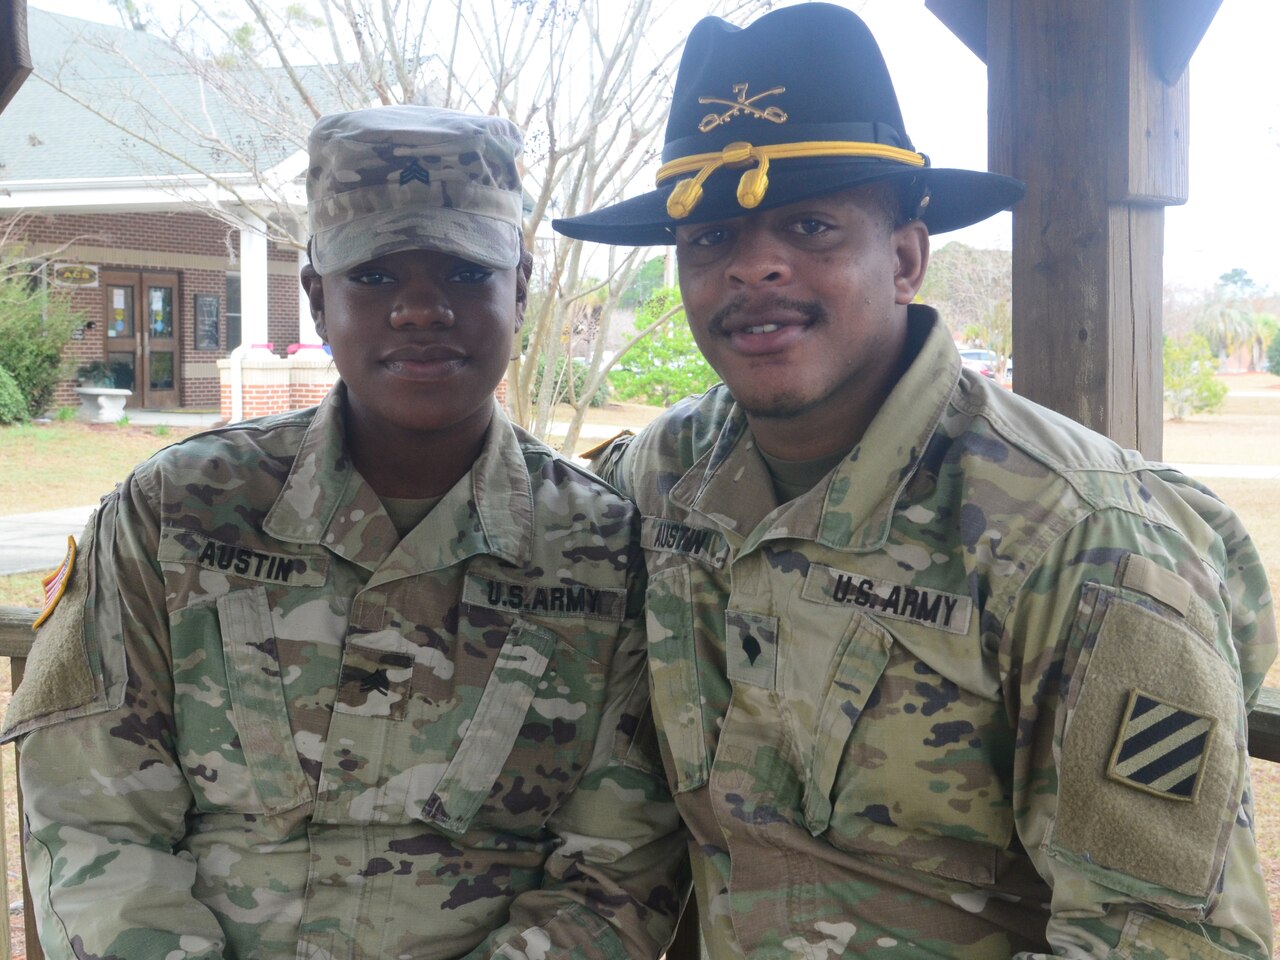 Army Sgt. Karrington Austin, left, and her husband, Spc. Dominque Austin, both assigned to the 5th Squadron, 7th Cavalry Regiment, pose for a photo at Fort Stewart, Ga., Feb. 12, 2018. For the first time in their careers, the Austins will face a deployment apart when Karrington deploys to South Korea this year. Army photo by Sgt. Ryan Tatum